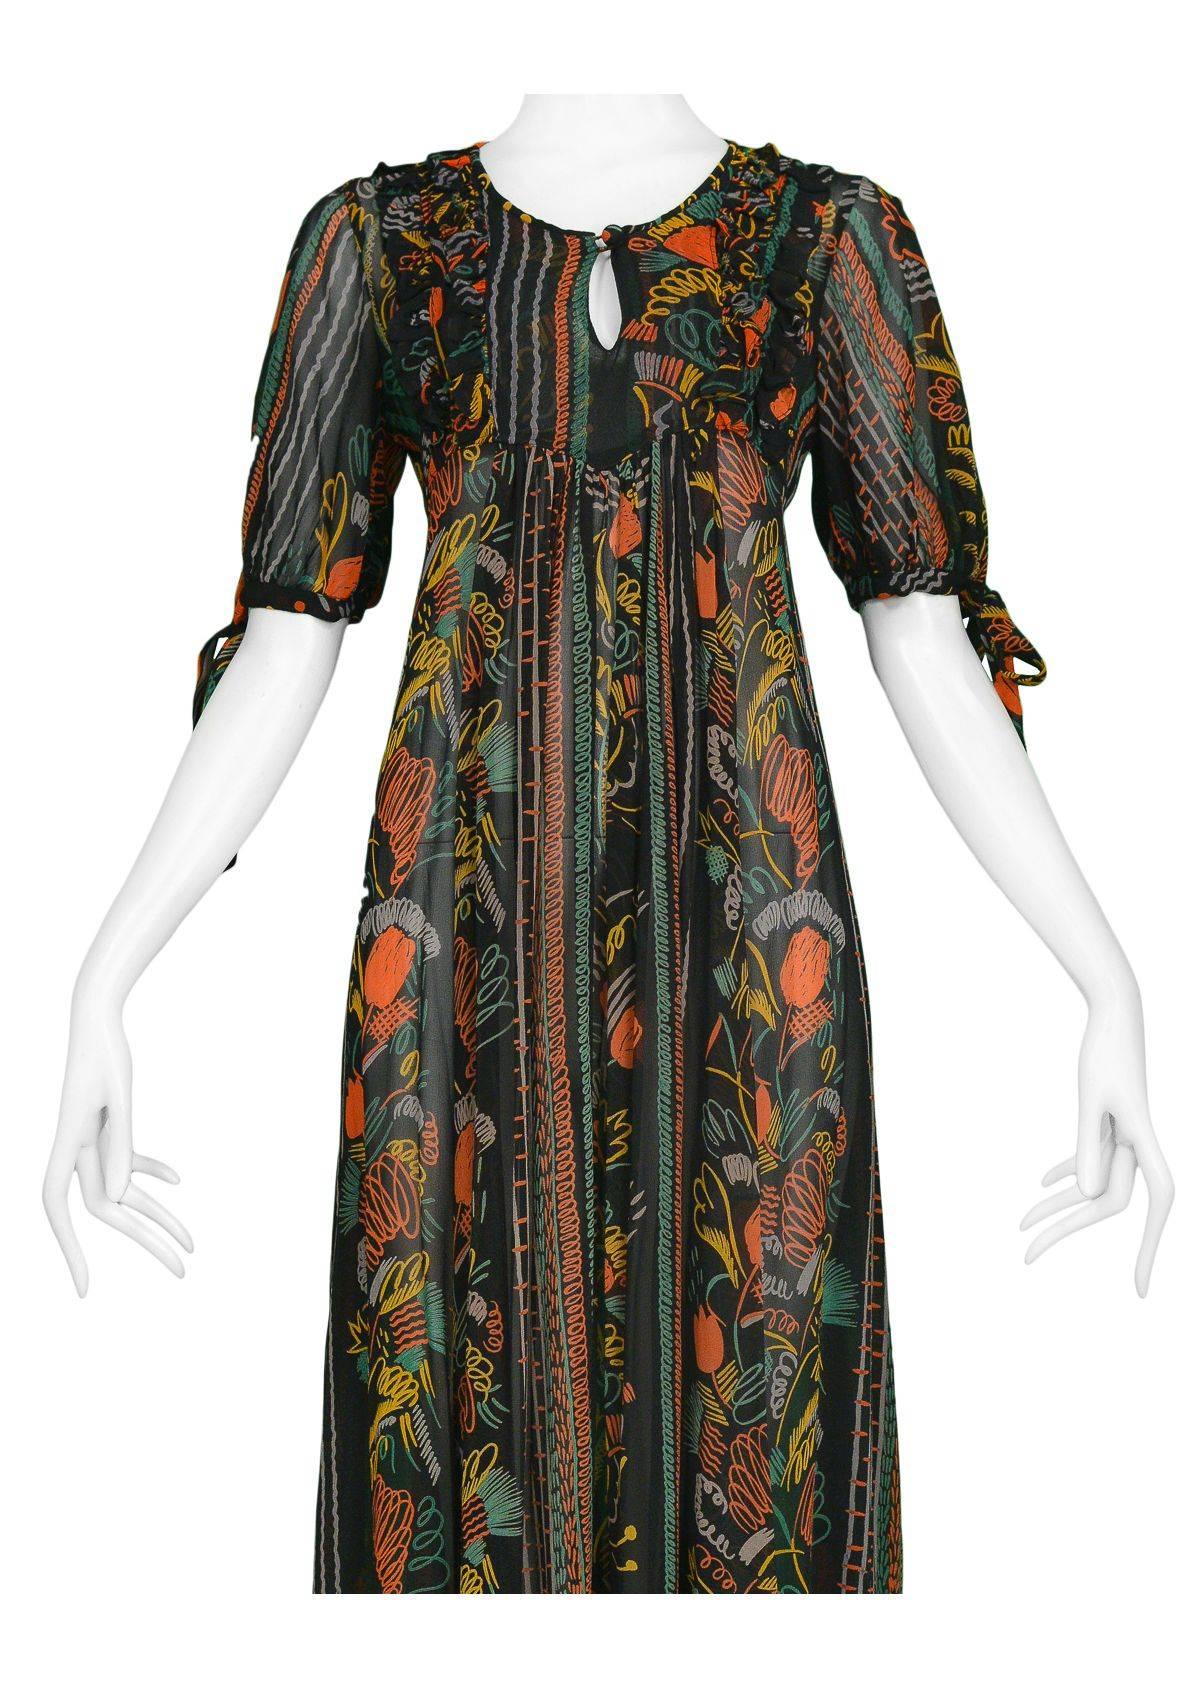 Vintage Ossie Clark black crepe maxi dress with colorful Celia Birtwell print. Dress features keyhole neck, ruffles at bodice, ties back and open sleeves with ties. Circa 1960's.